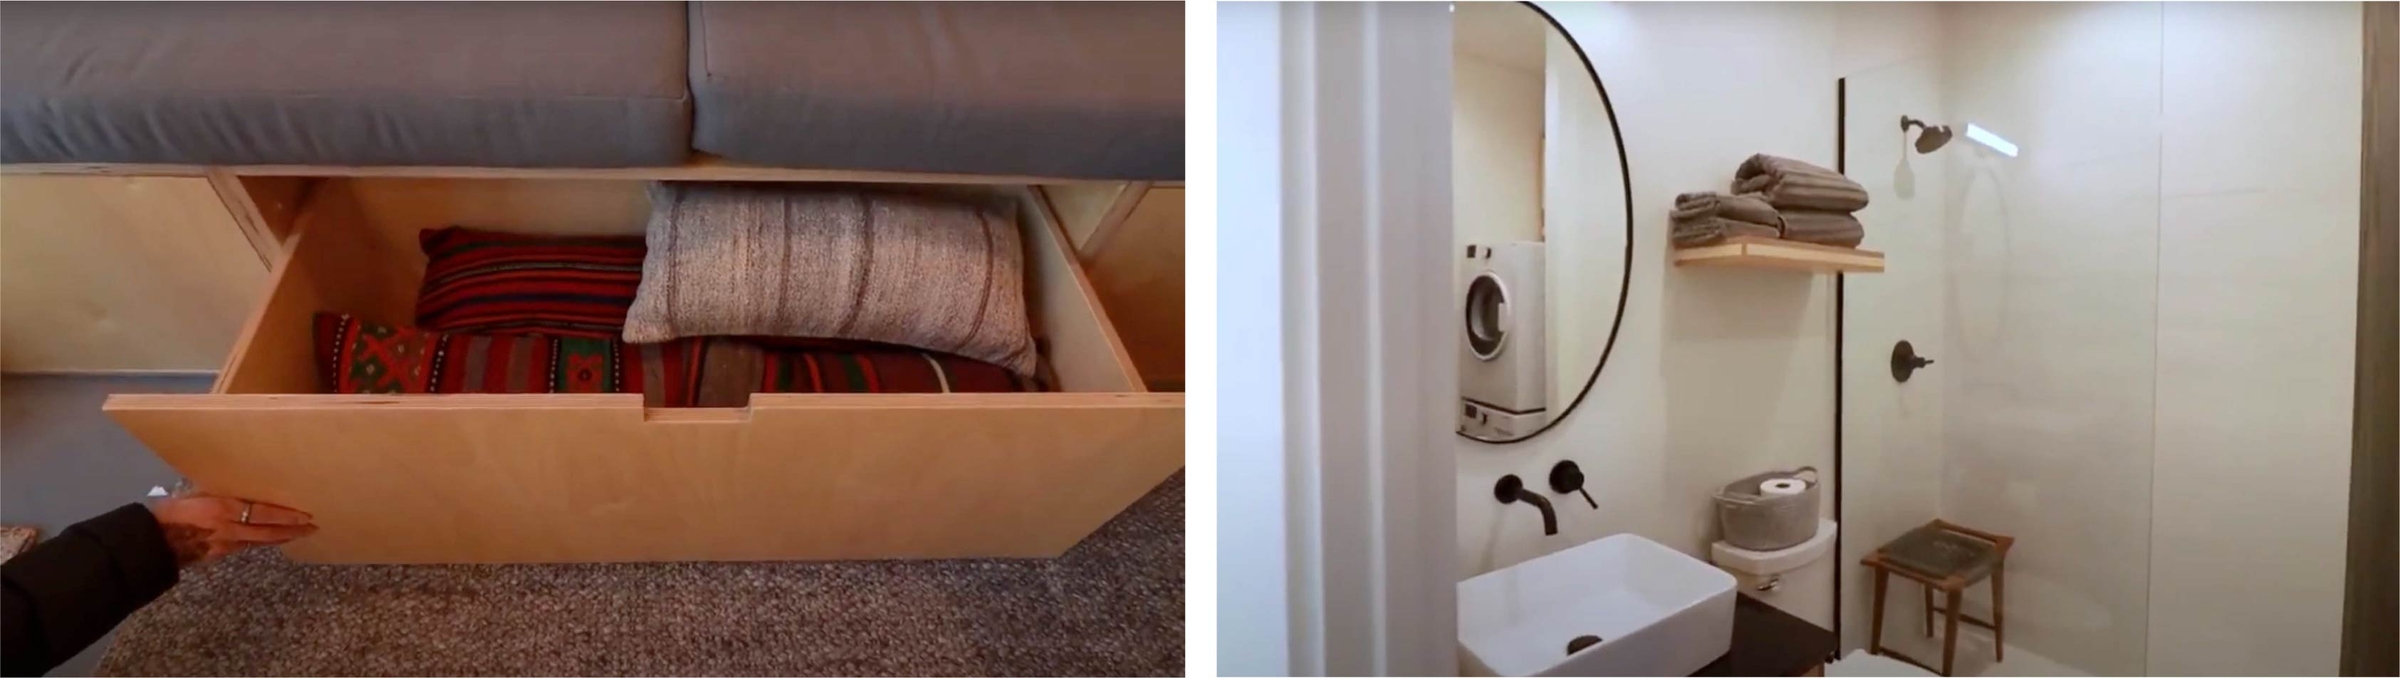 Slide out drawer under bench seat and small bathroom with round mirror over sink, toilet, and a large shower